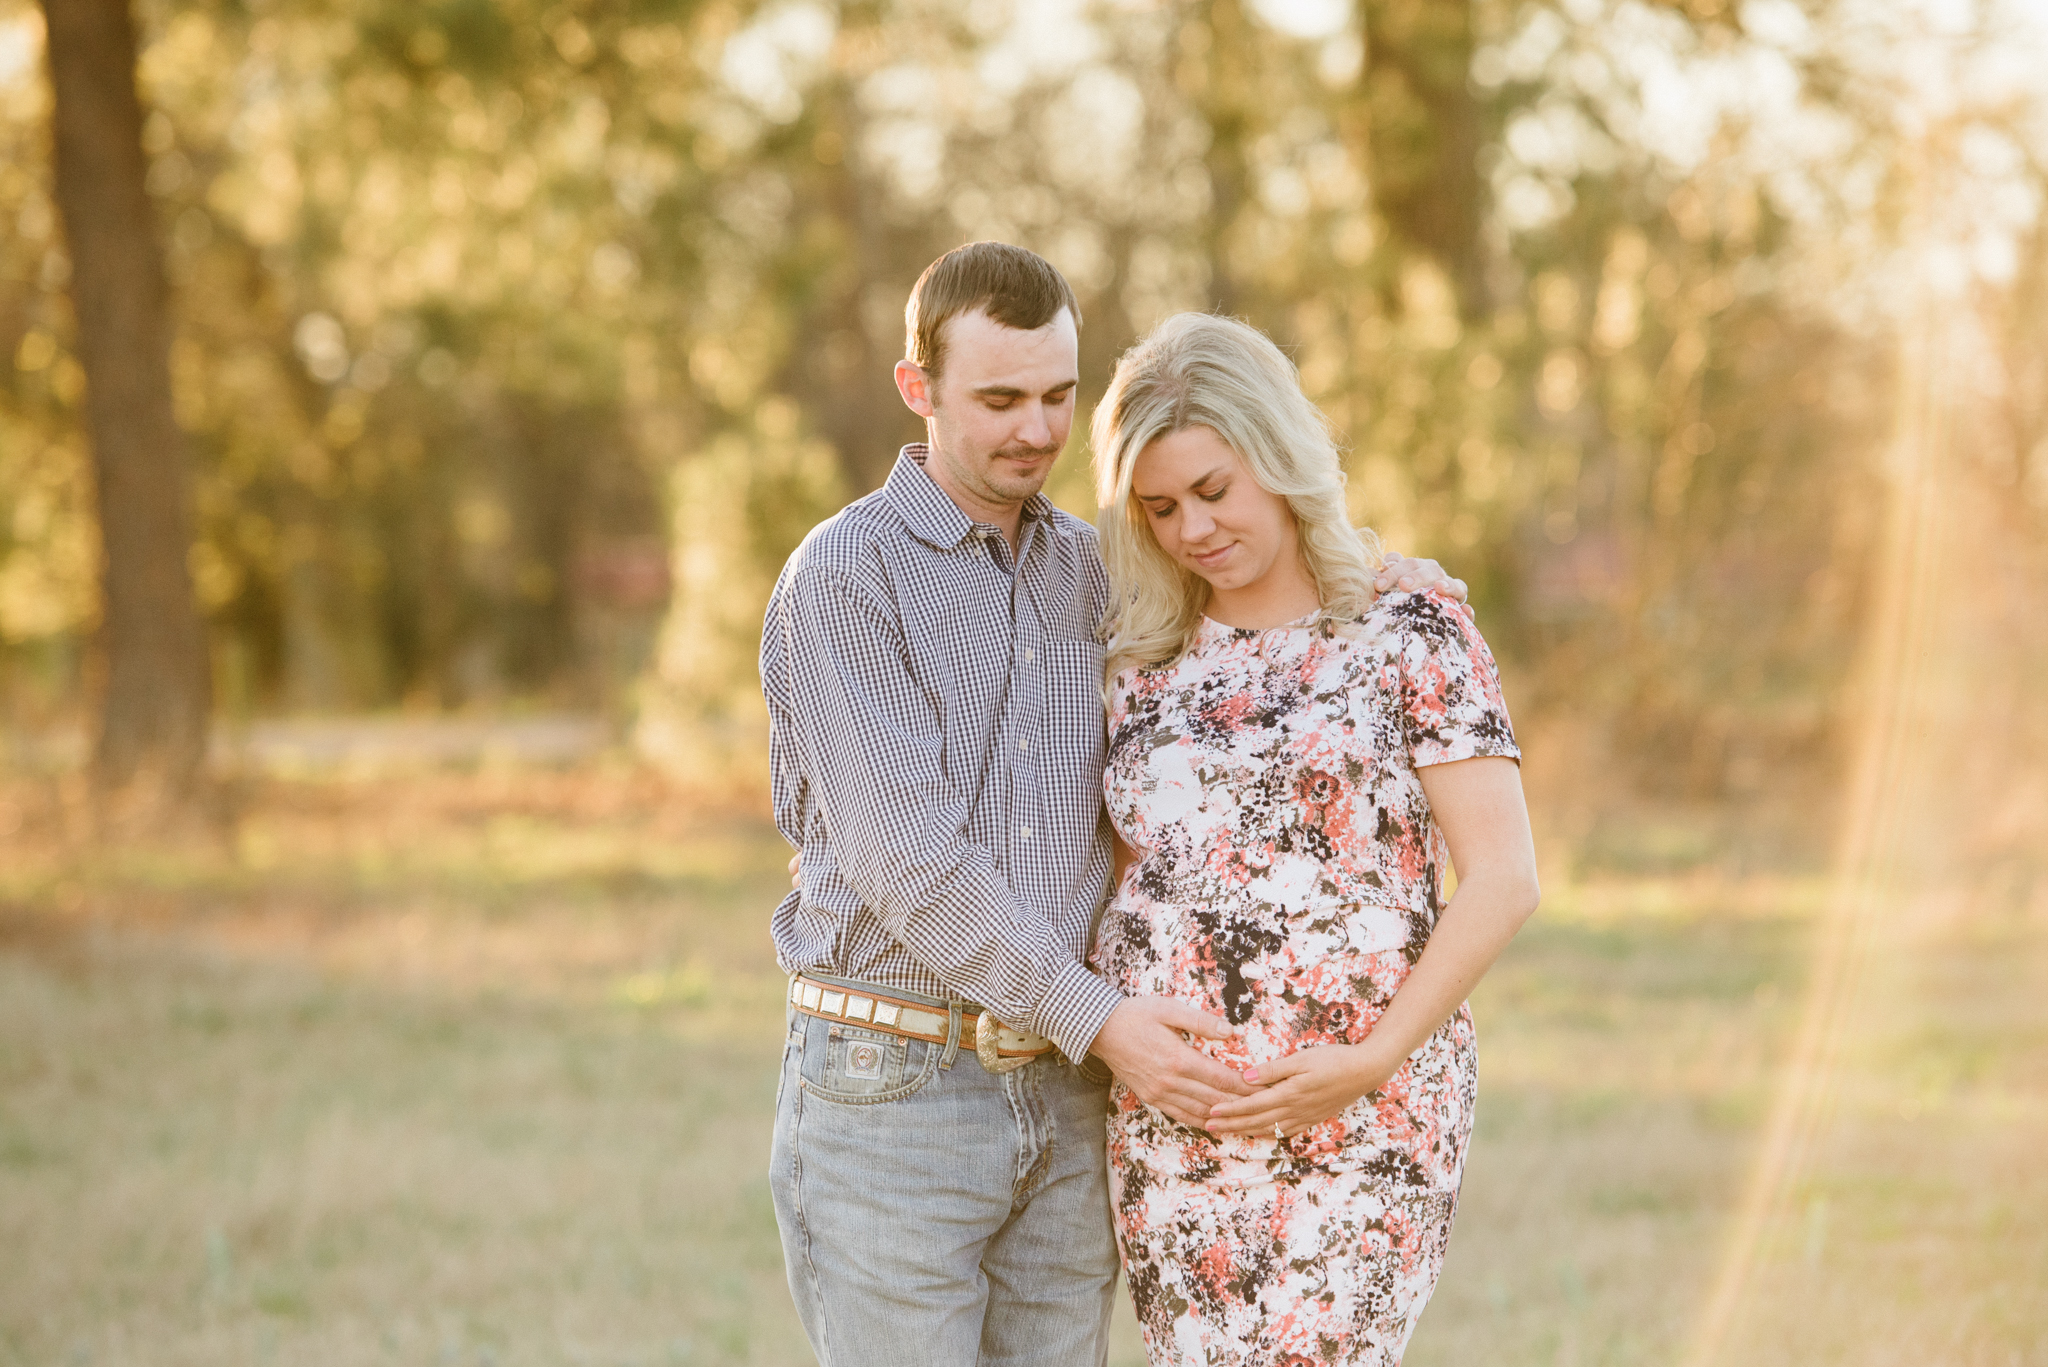 Candace Pair Photography | Maternity | East Texas | Lindale, Sulphur Springs, Tyler